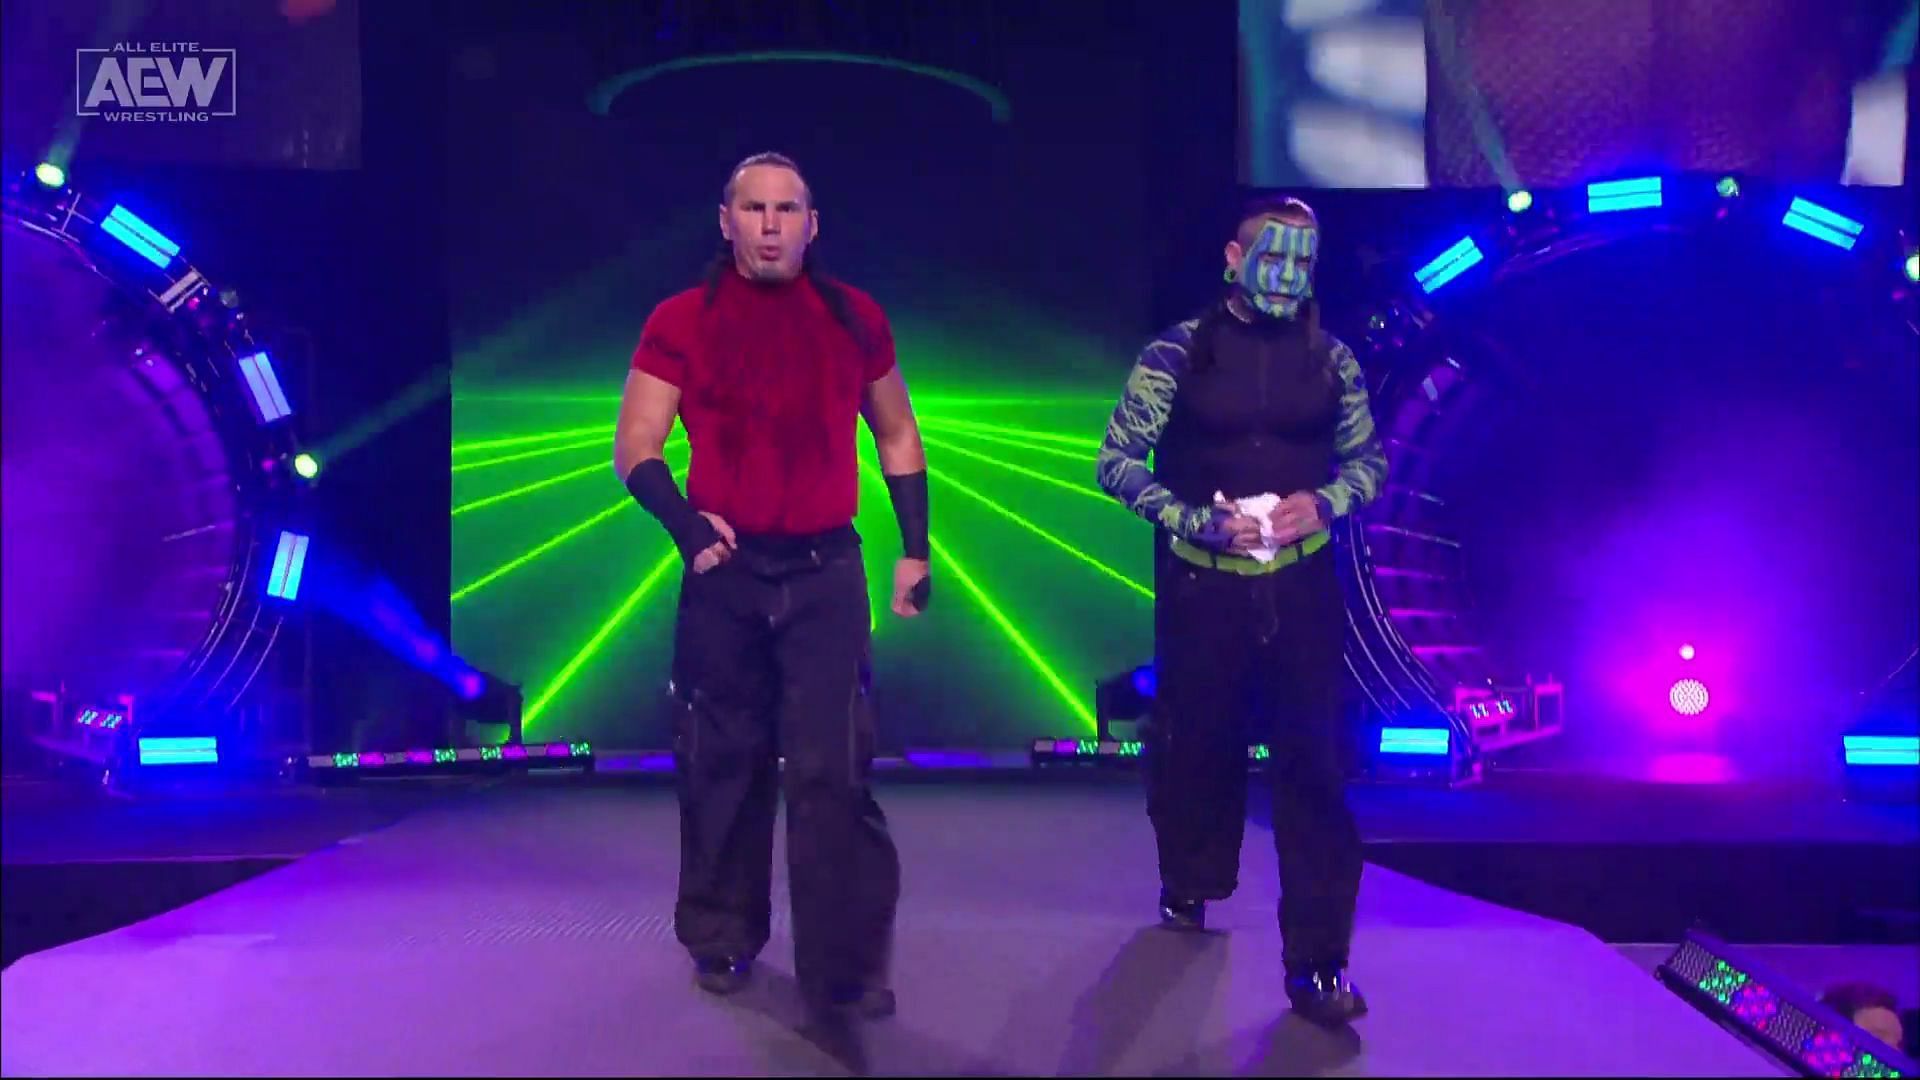 The brothers making their way to the ring before their match at AEW Dynamite